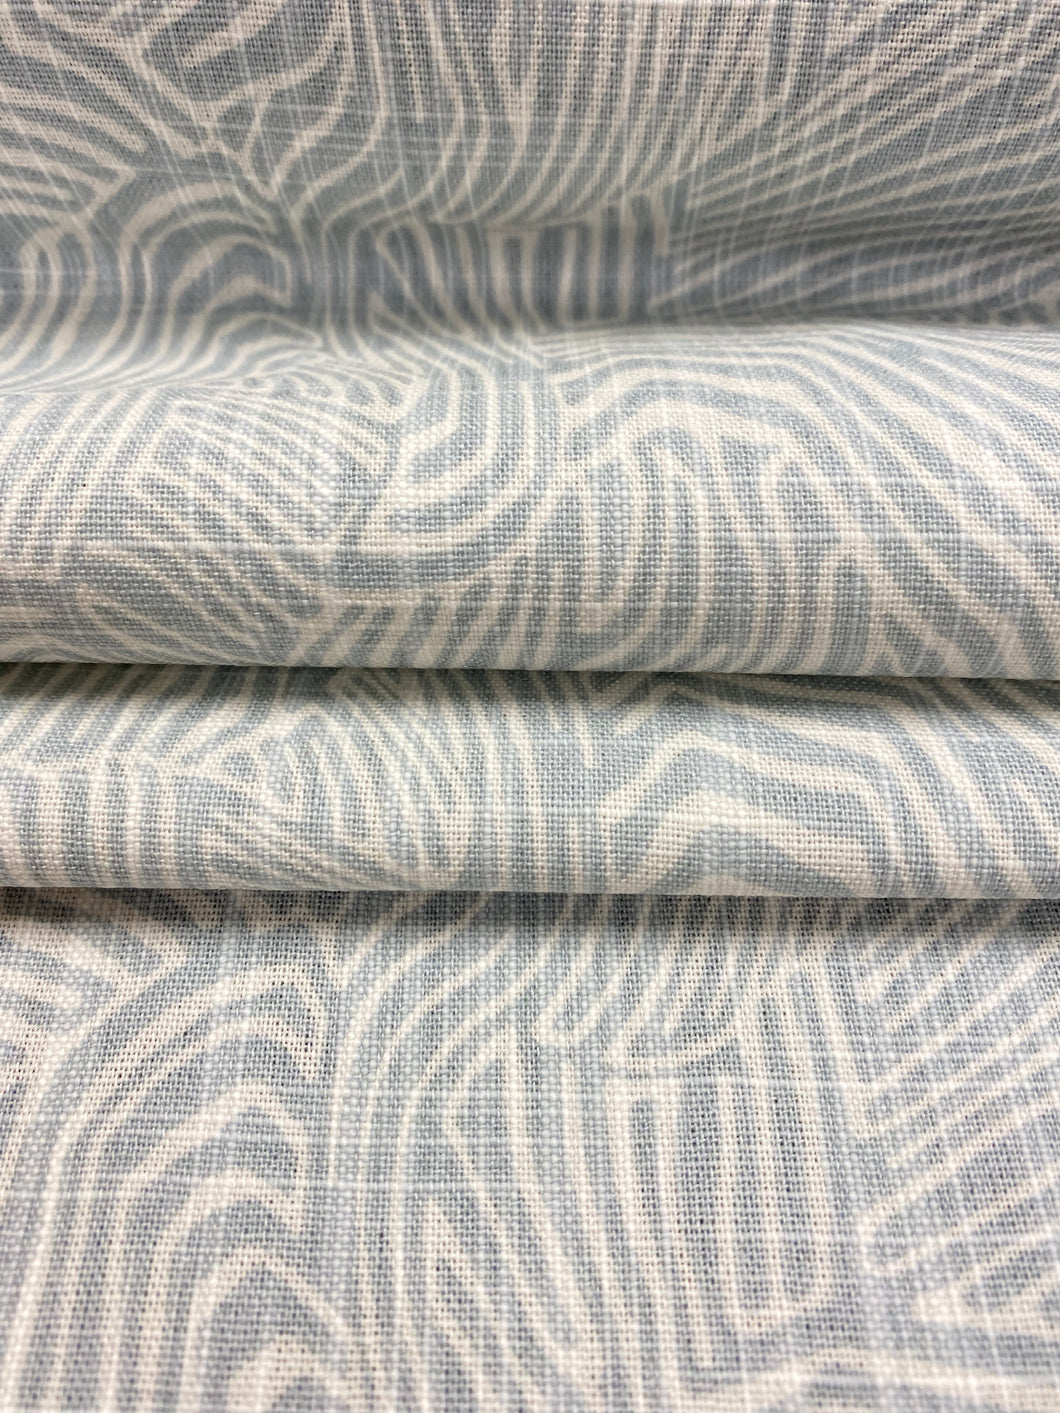 Blue Cream Abstract Indoor Outdoor Water & Stain Resistant Cotton Upholstery Drapery Fabric STA 3518